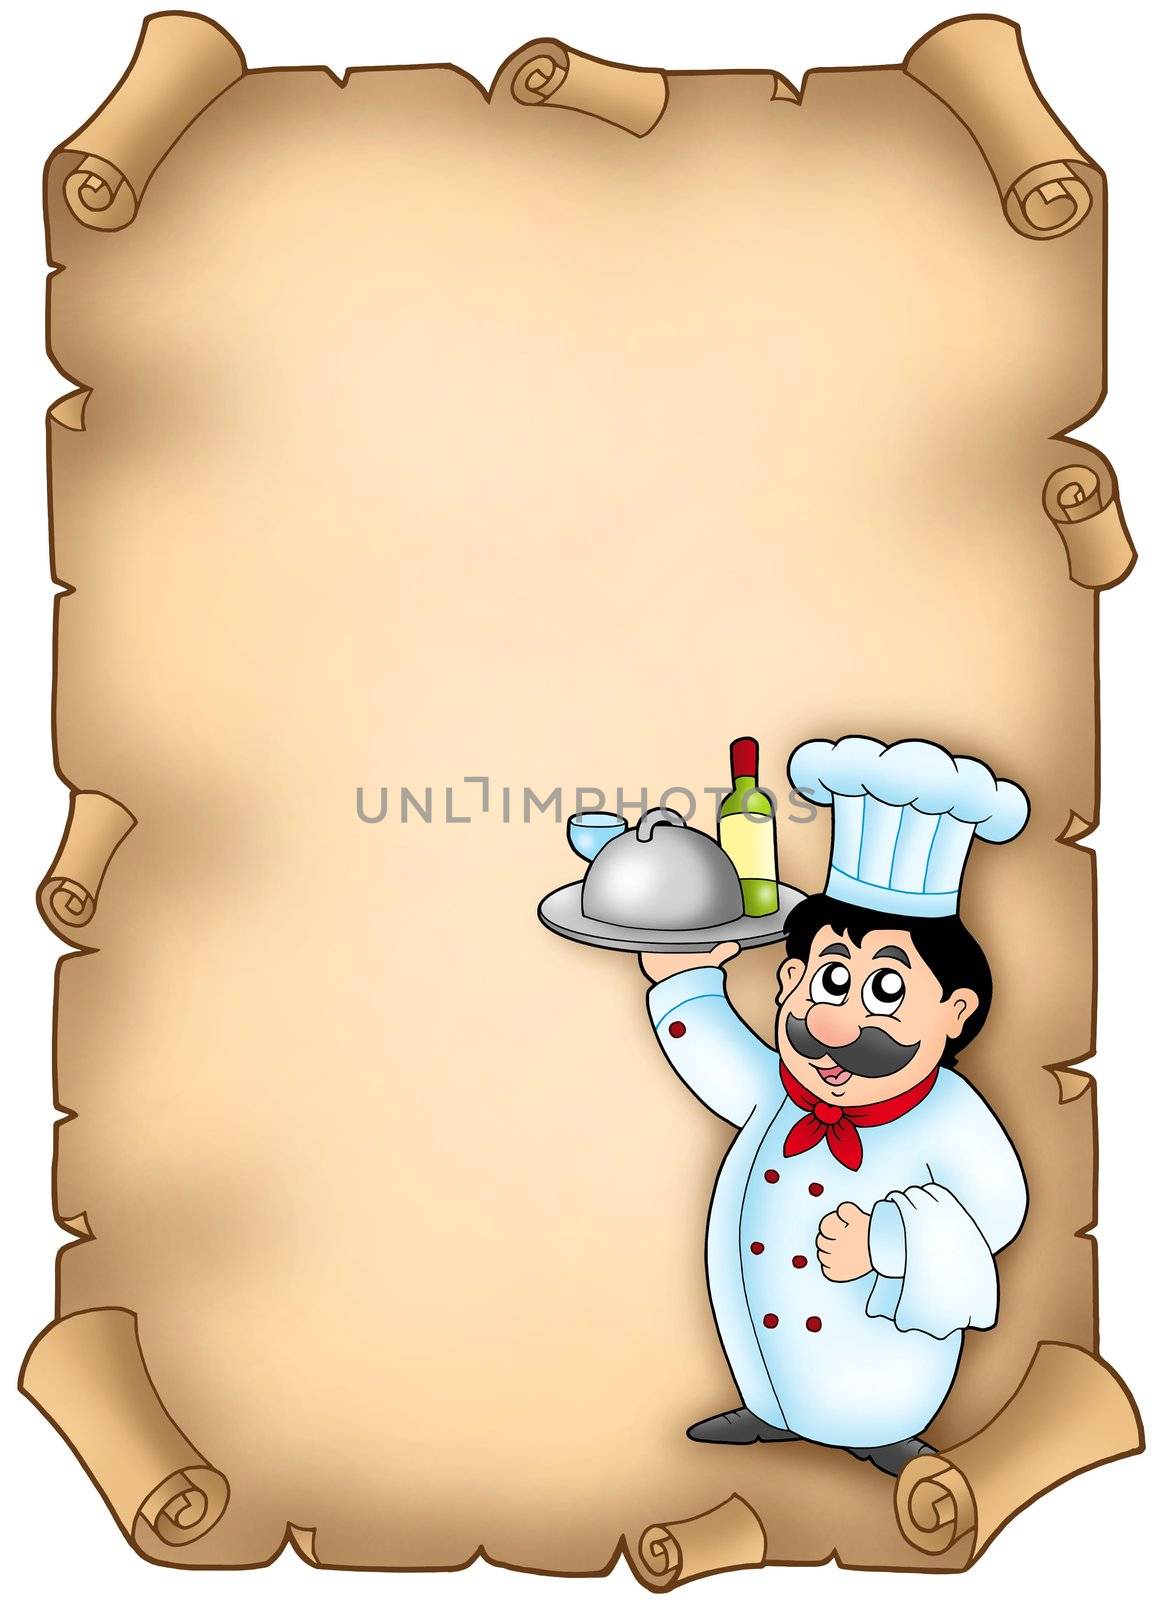 Chef holding meal on parchment - color illustration.